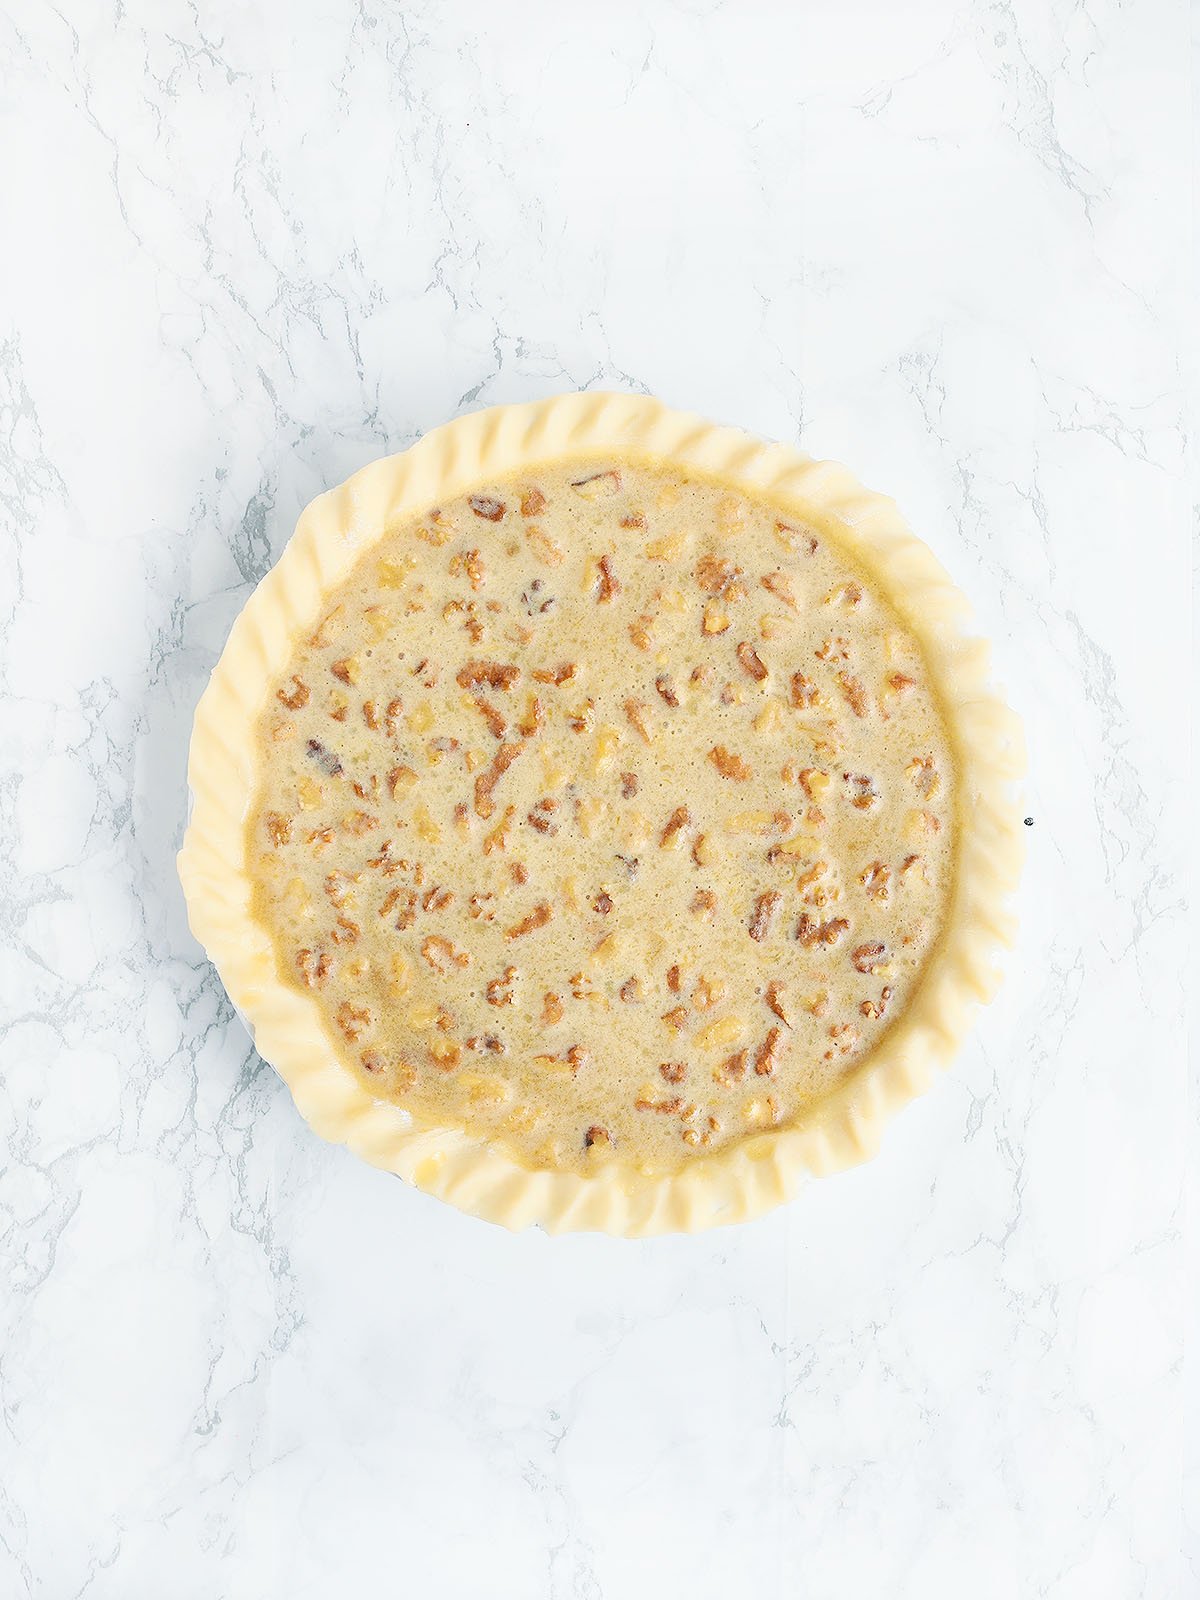 unbaked Kentucky Derby pie on a white marble background